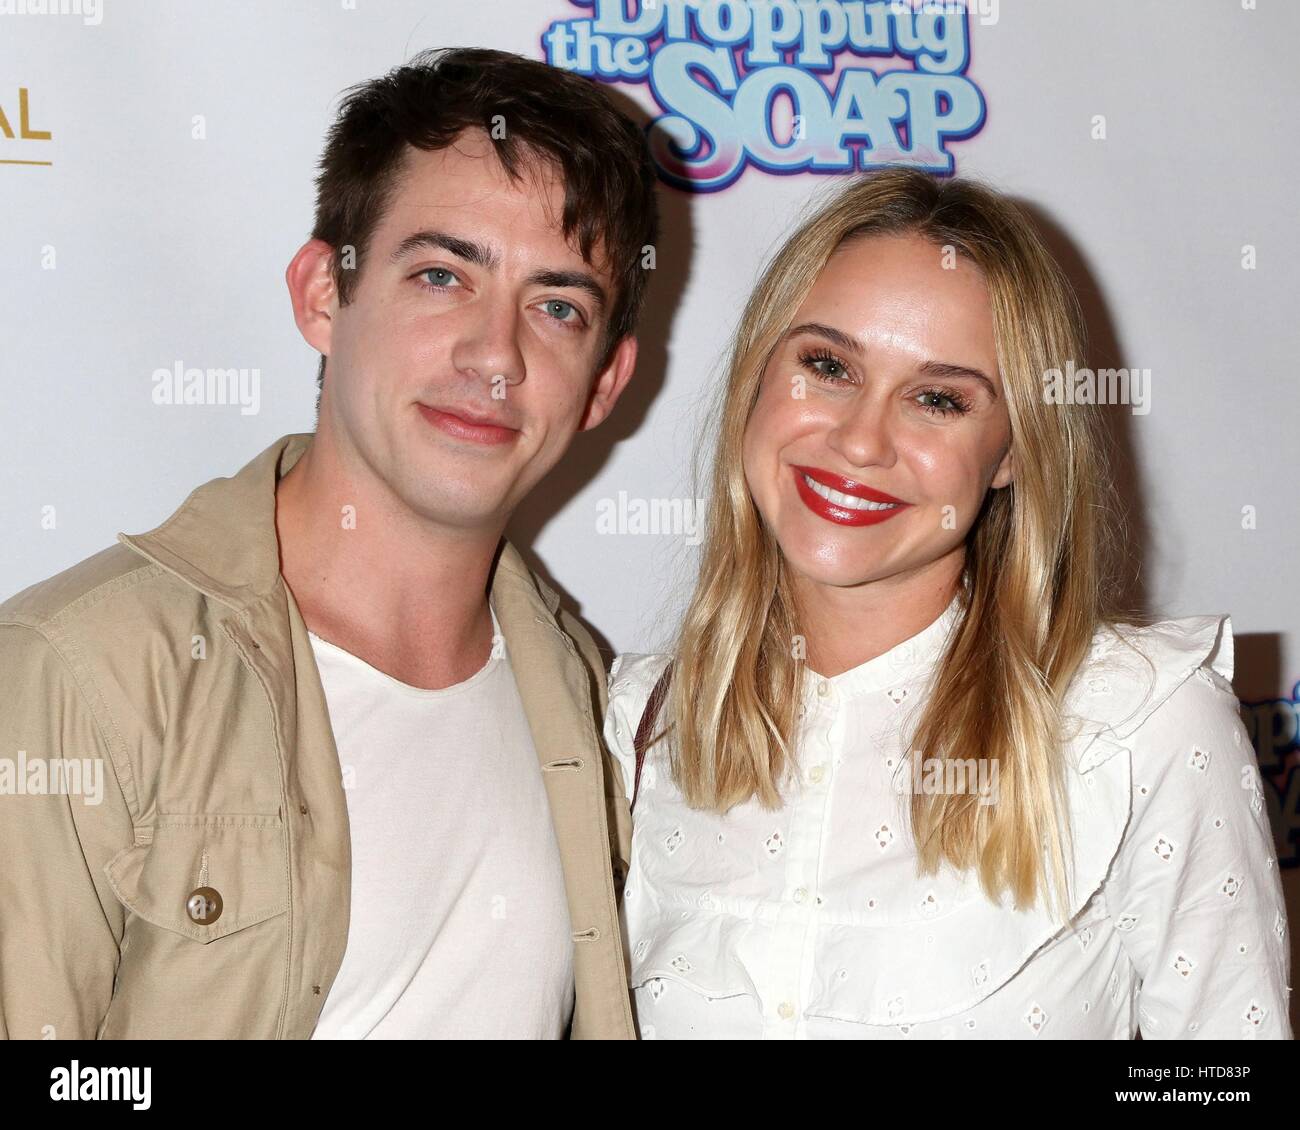 Beverly Hills, CA. 7th Mar, 2017. Kevin McHale, Becca Tobin at arrivals for DROPPING THE SOAP Premiere, Writers Guild Theater, Beverly Hills, CA March 7, 2017. Credit: Priscilla Grant/Everett Collection/Alamy Live News Stock Photo